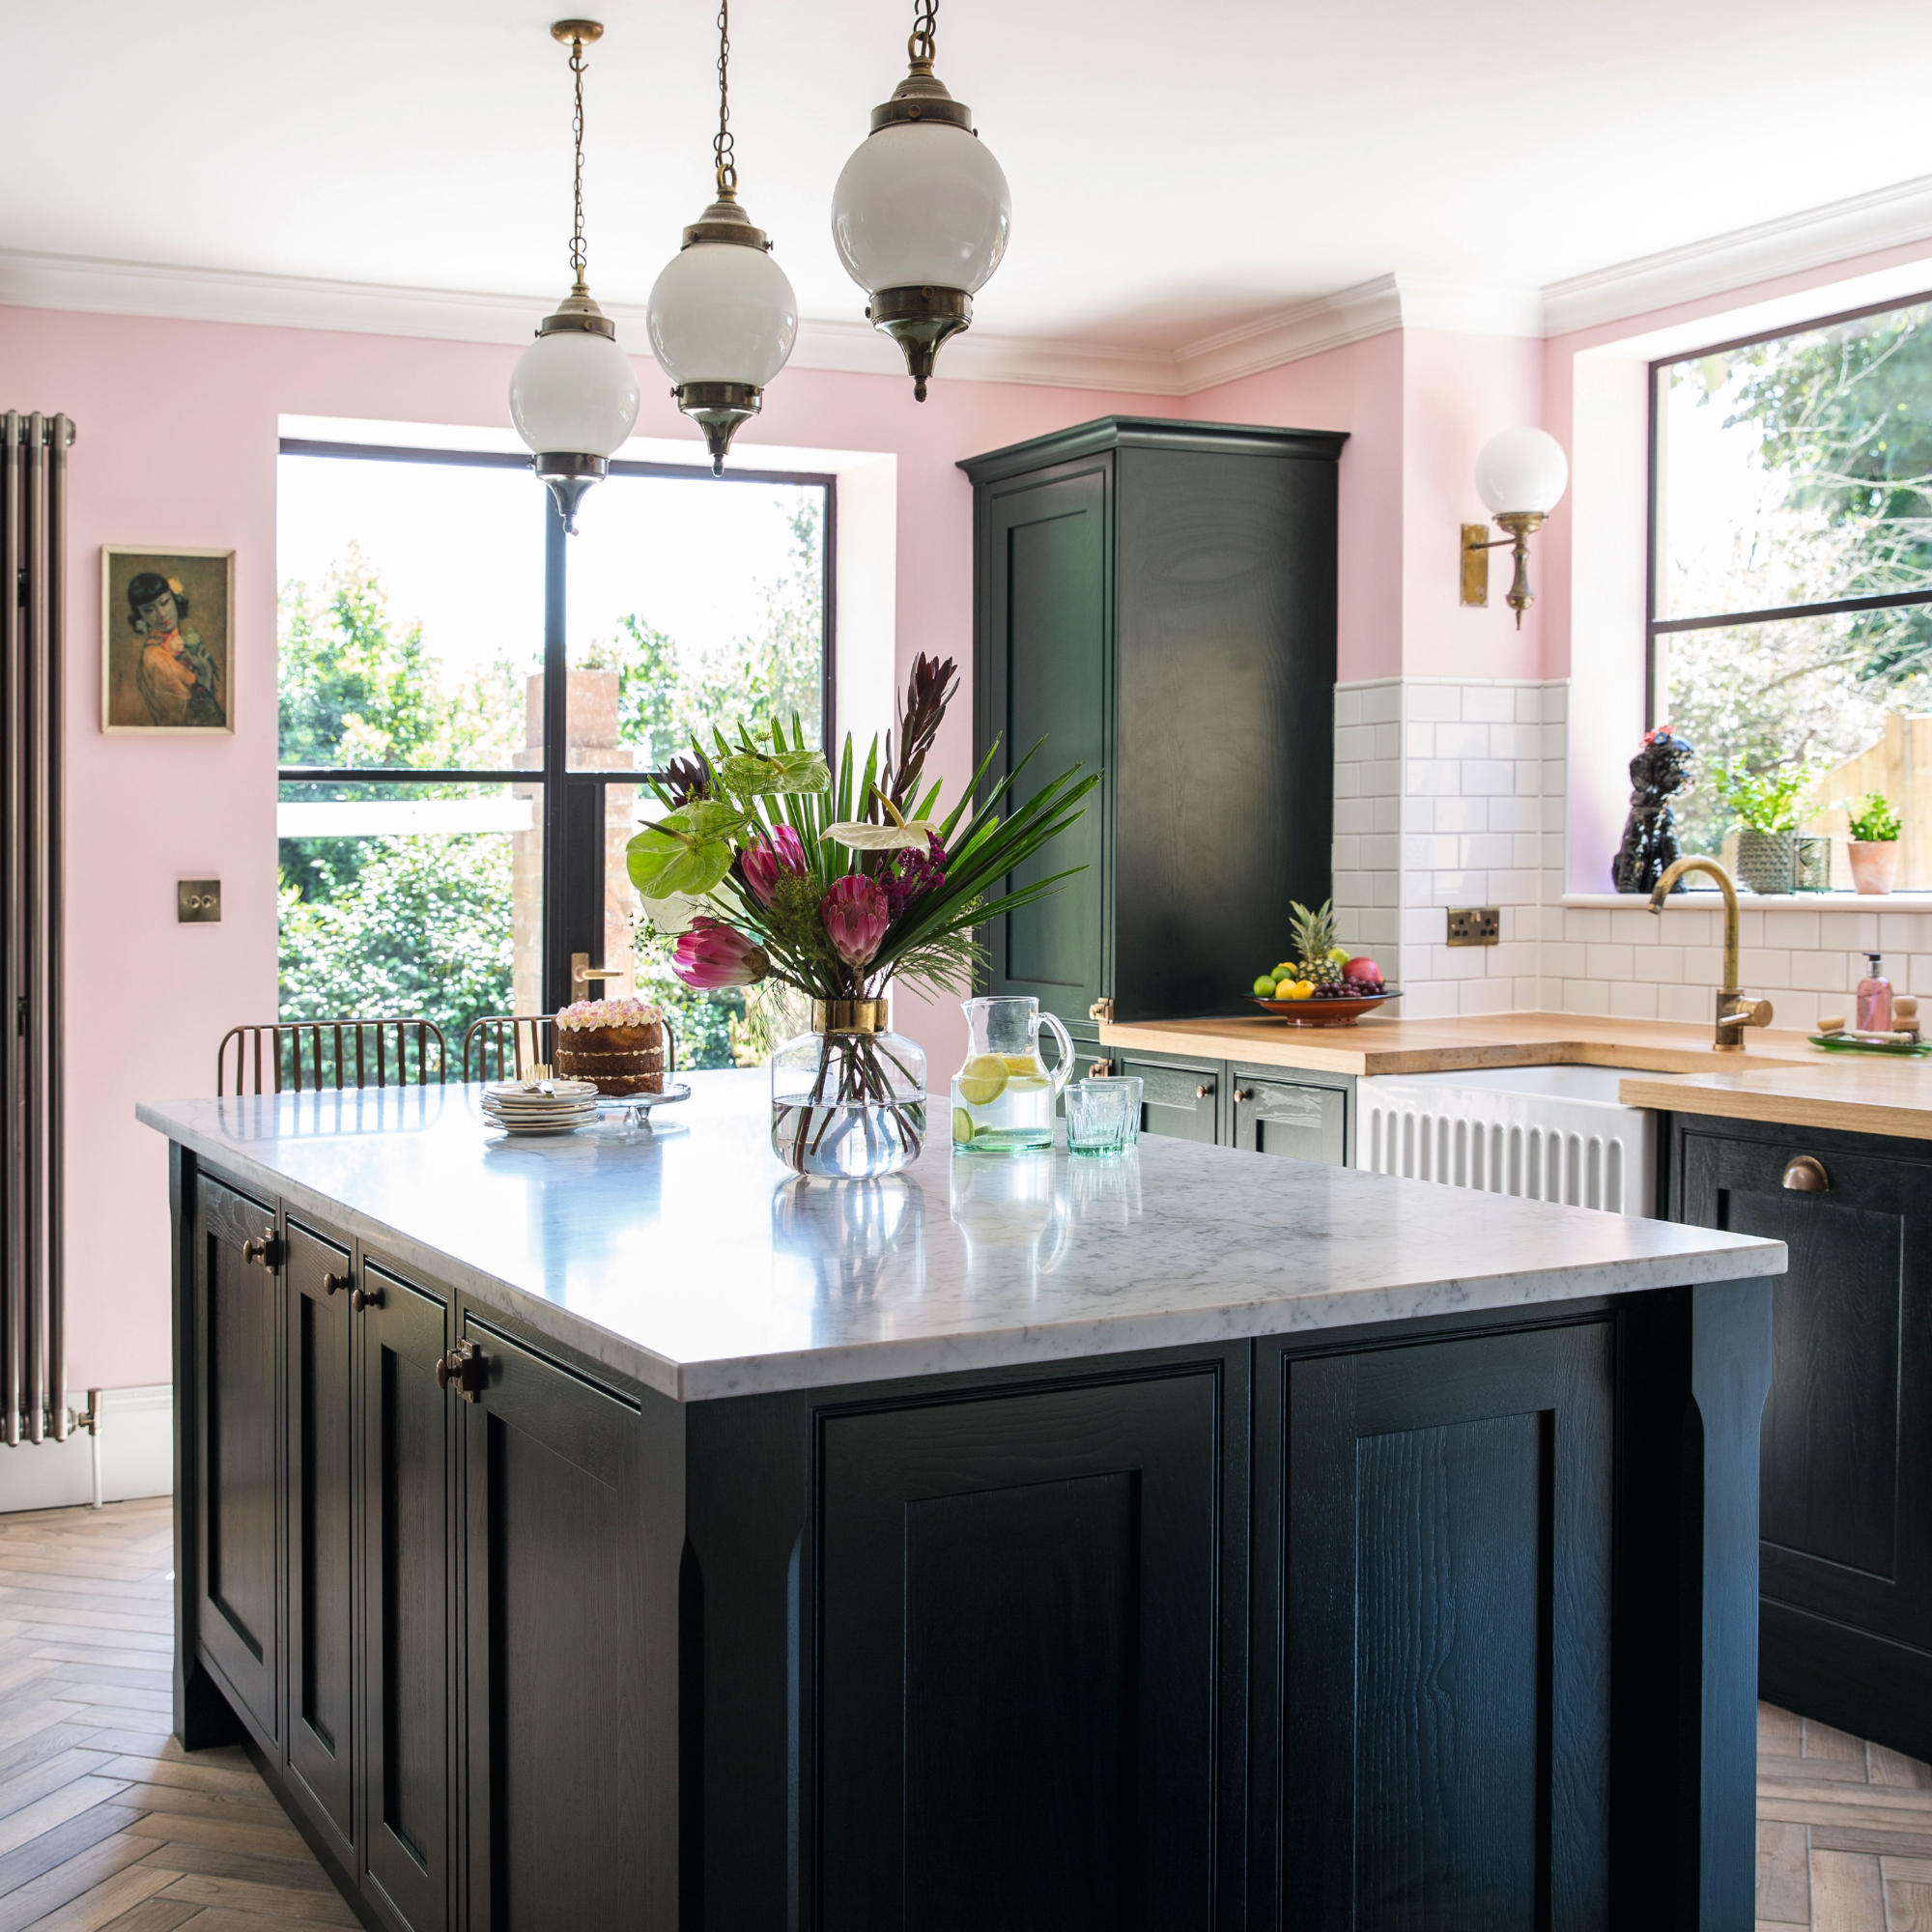 Open plan kitchen with pink walls, black Shaker style kitchen units, and rustic vintage furniture